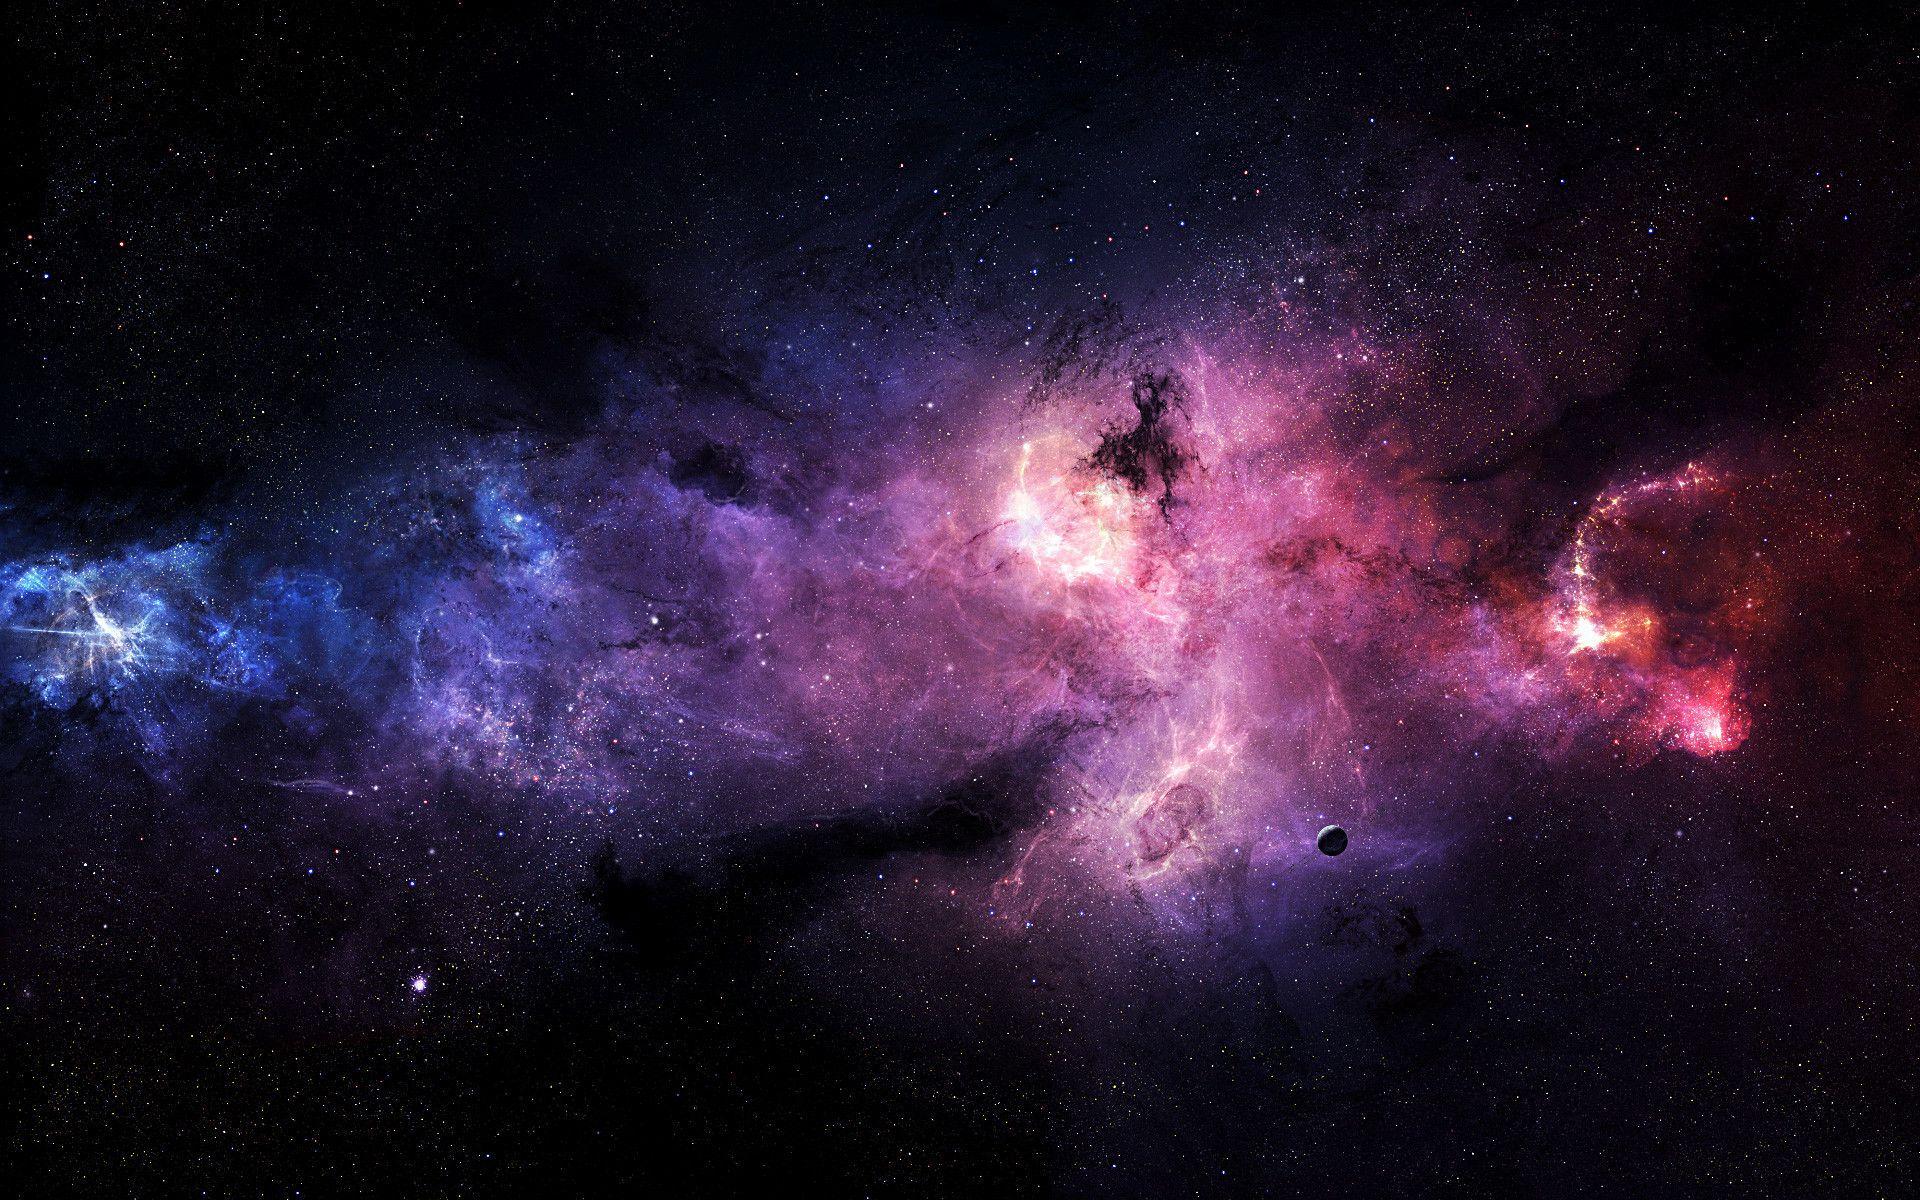 Outer Space Desktop Background Image 6 HD Wallpaper. lzamgs